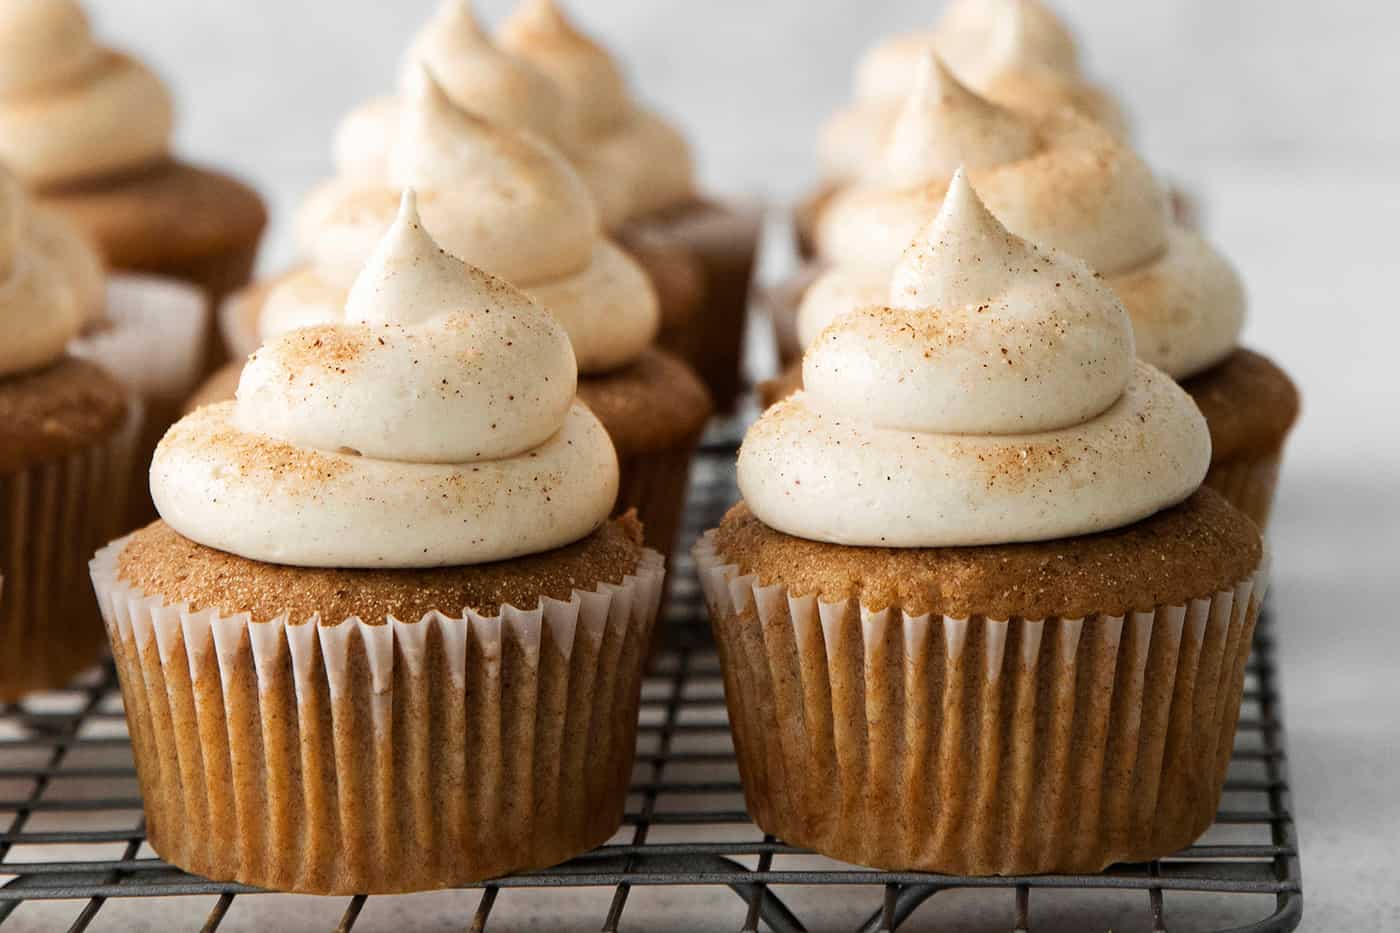 cinnamon cupcakes with cream cheese frosting sprinkled with cinnamon-sugar